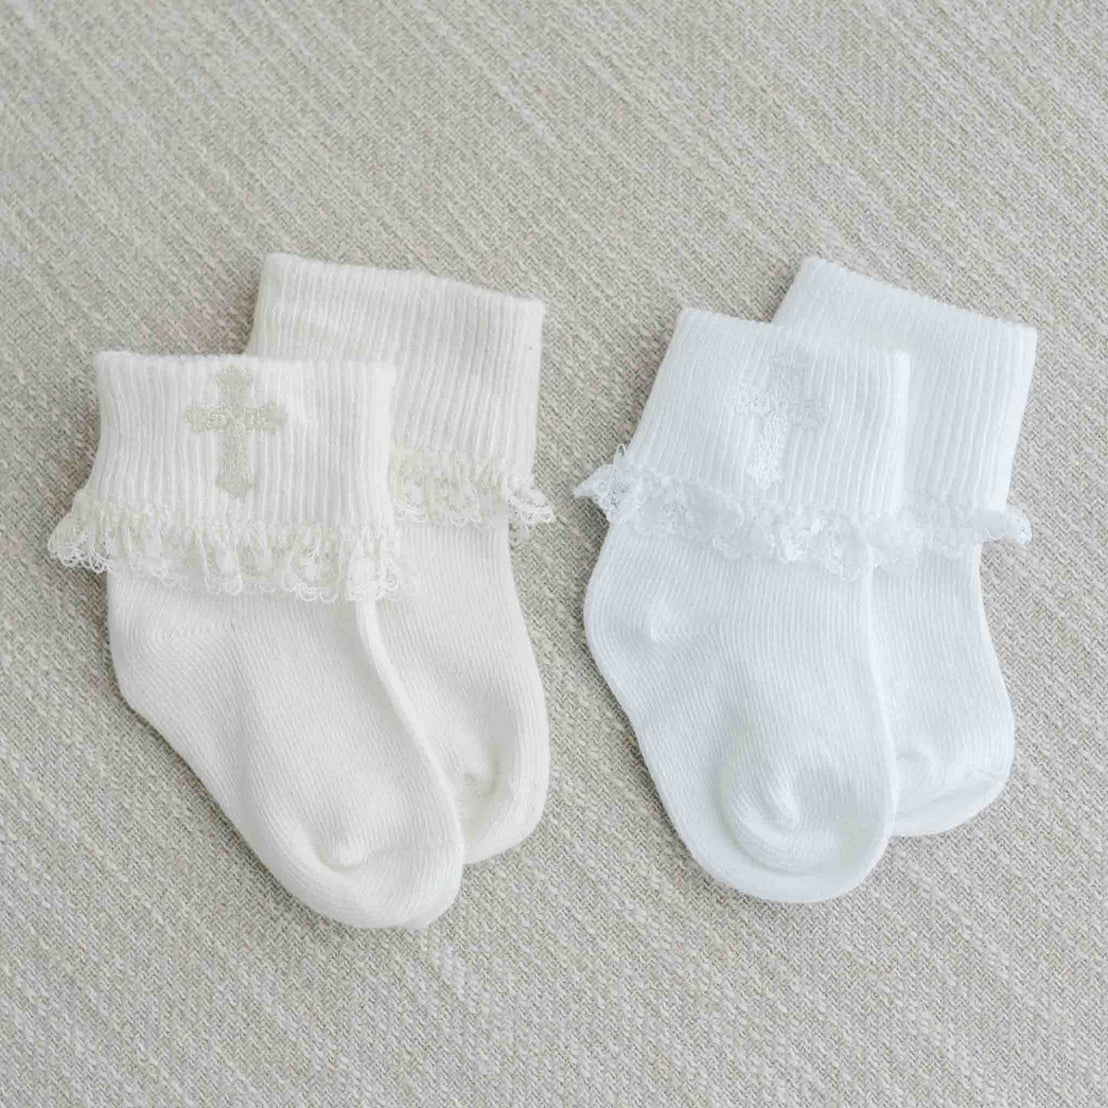 Two pairs of white Lace Cross Socks, placed on a light gray textured background.